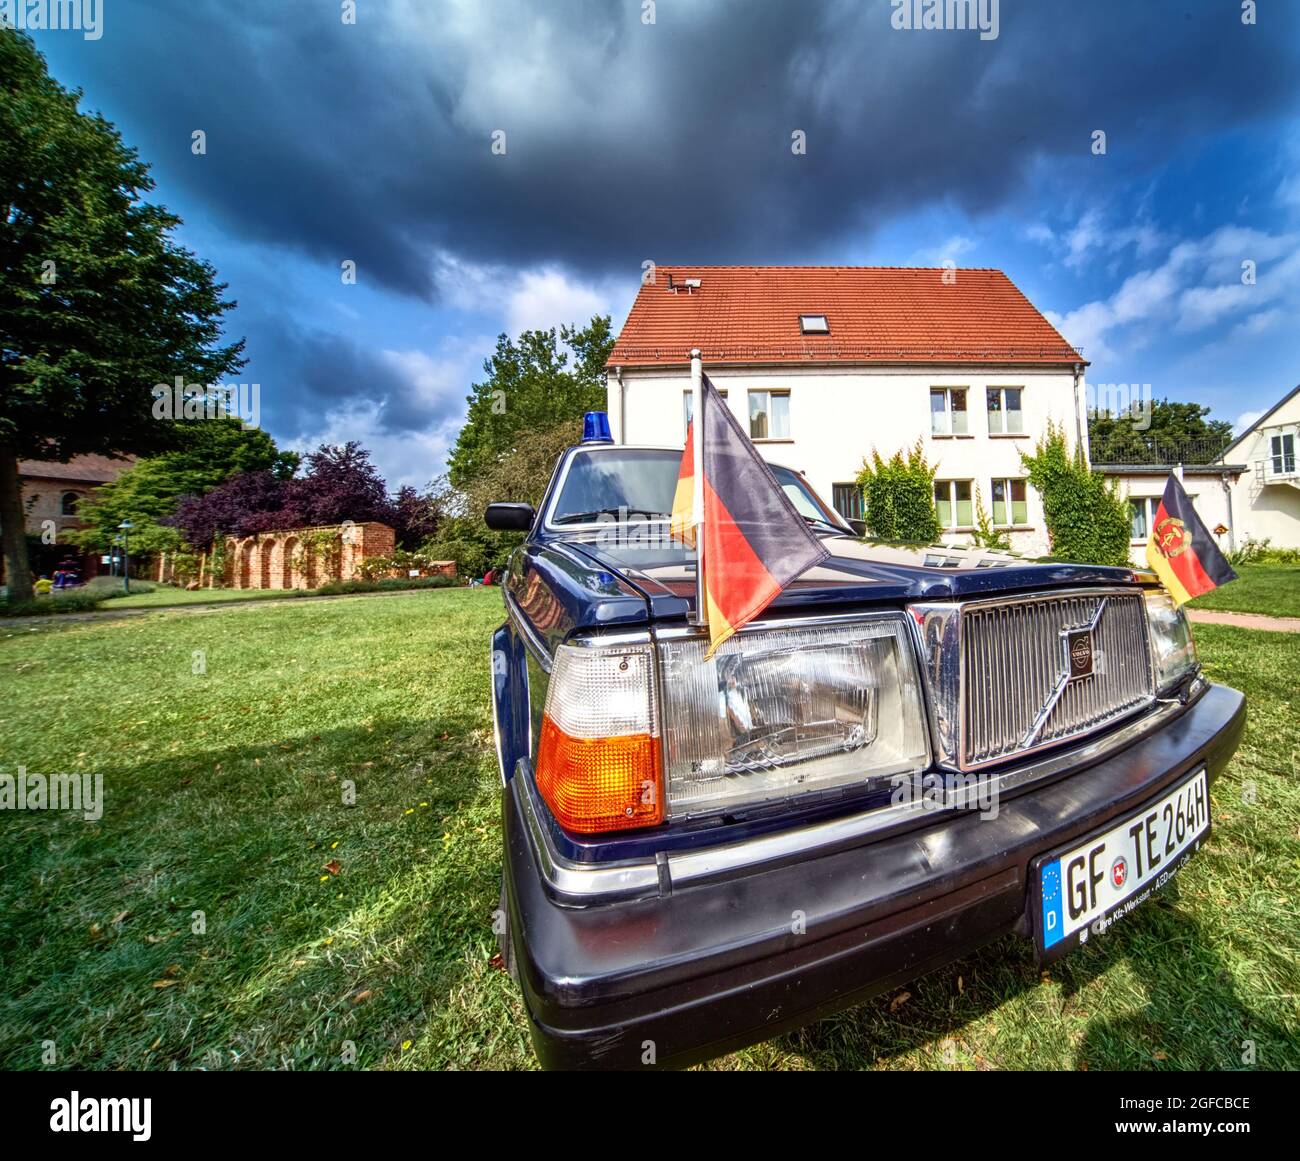 Volvo 264 TE, a car from the Swedish manufacturer formerly used for members of the GDR Politburo at a classic car show in Lehnin, Germany, Aug. 21, 20 Stock Photo